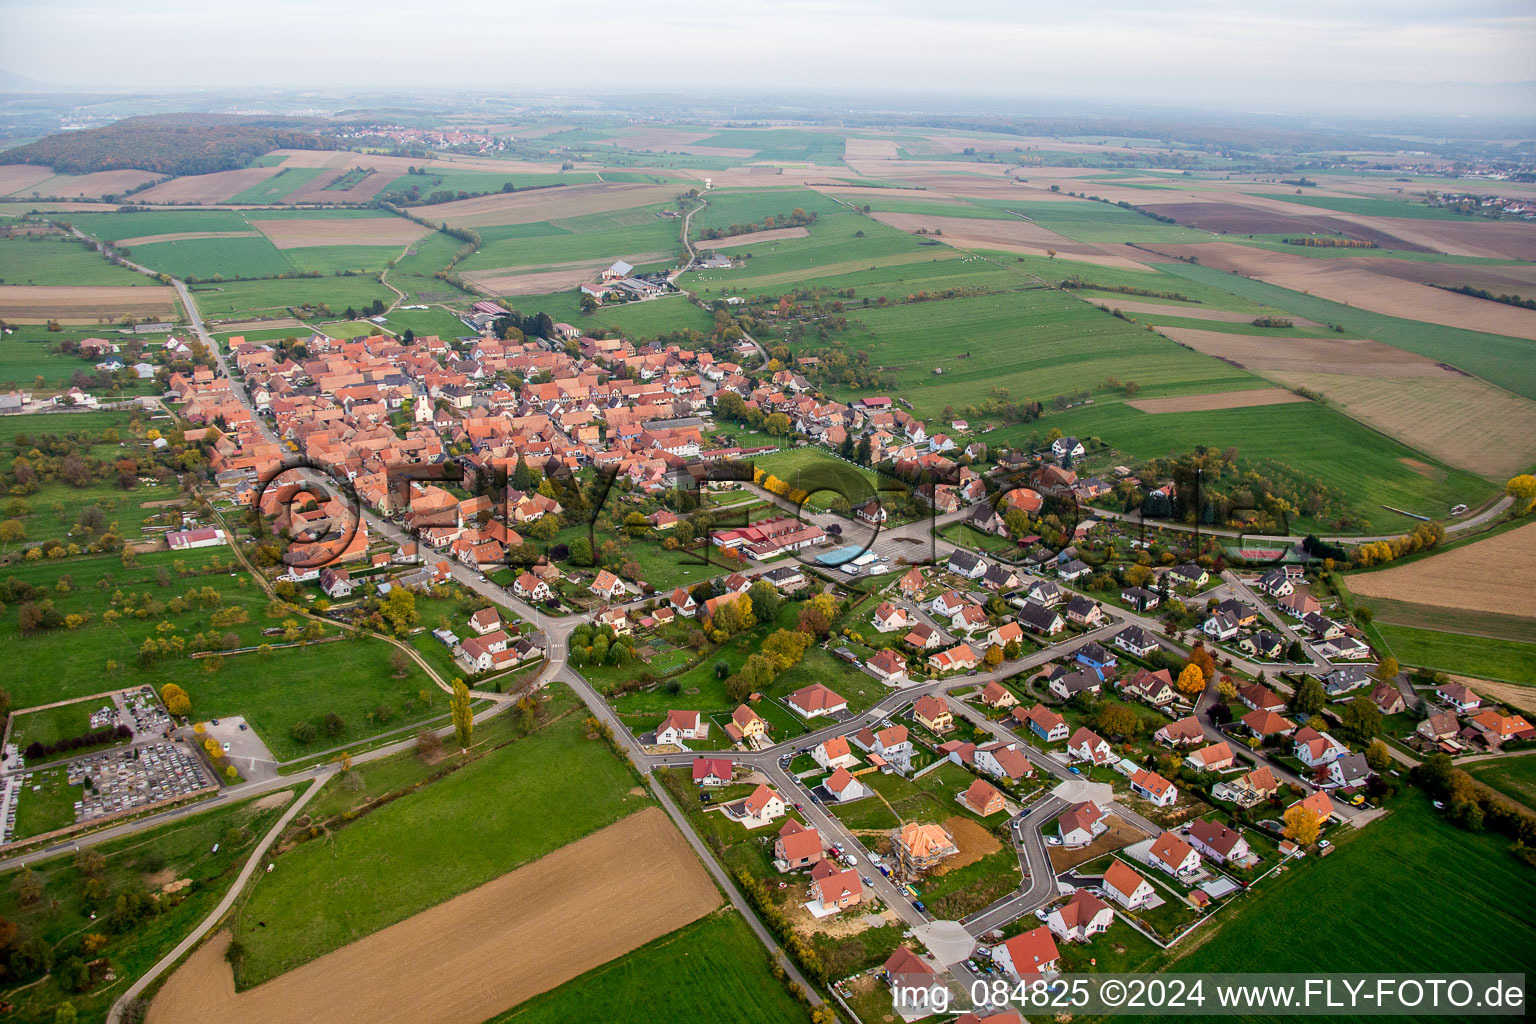 Village - view on the edge of agricultural fields and farmland in Uhrwiller in Grand Est, France